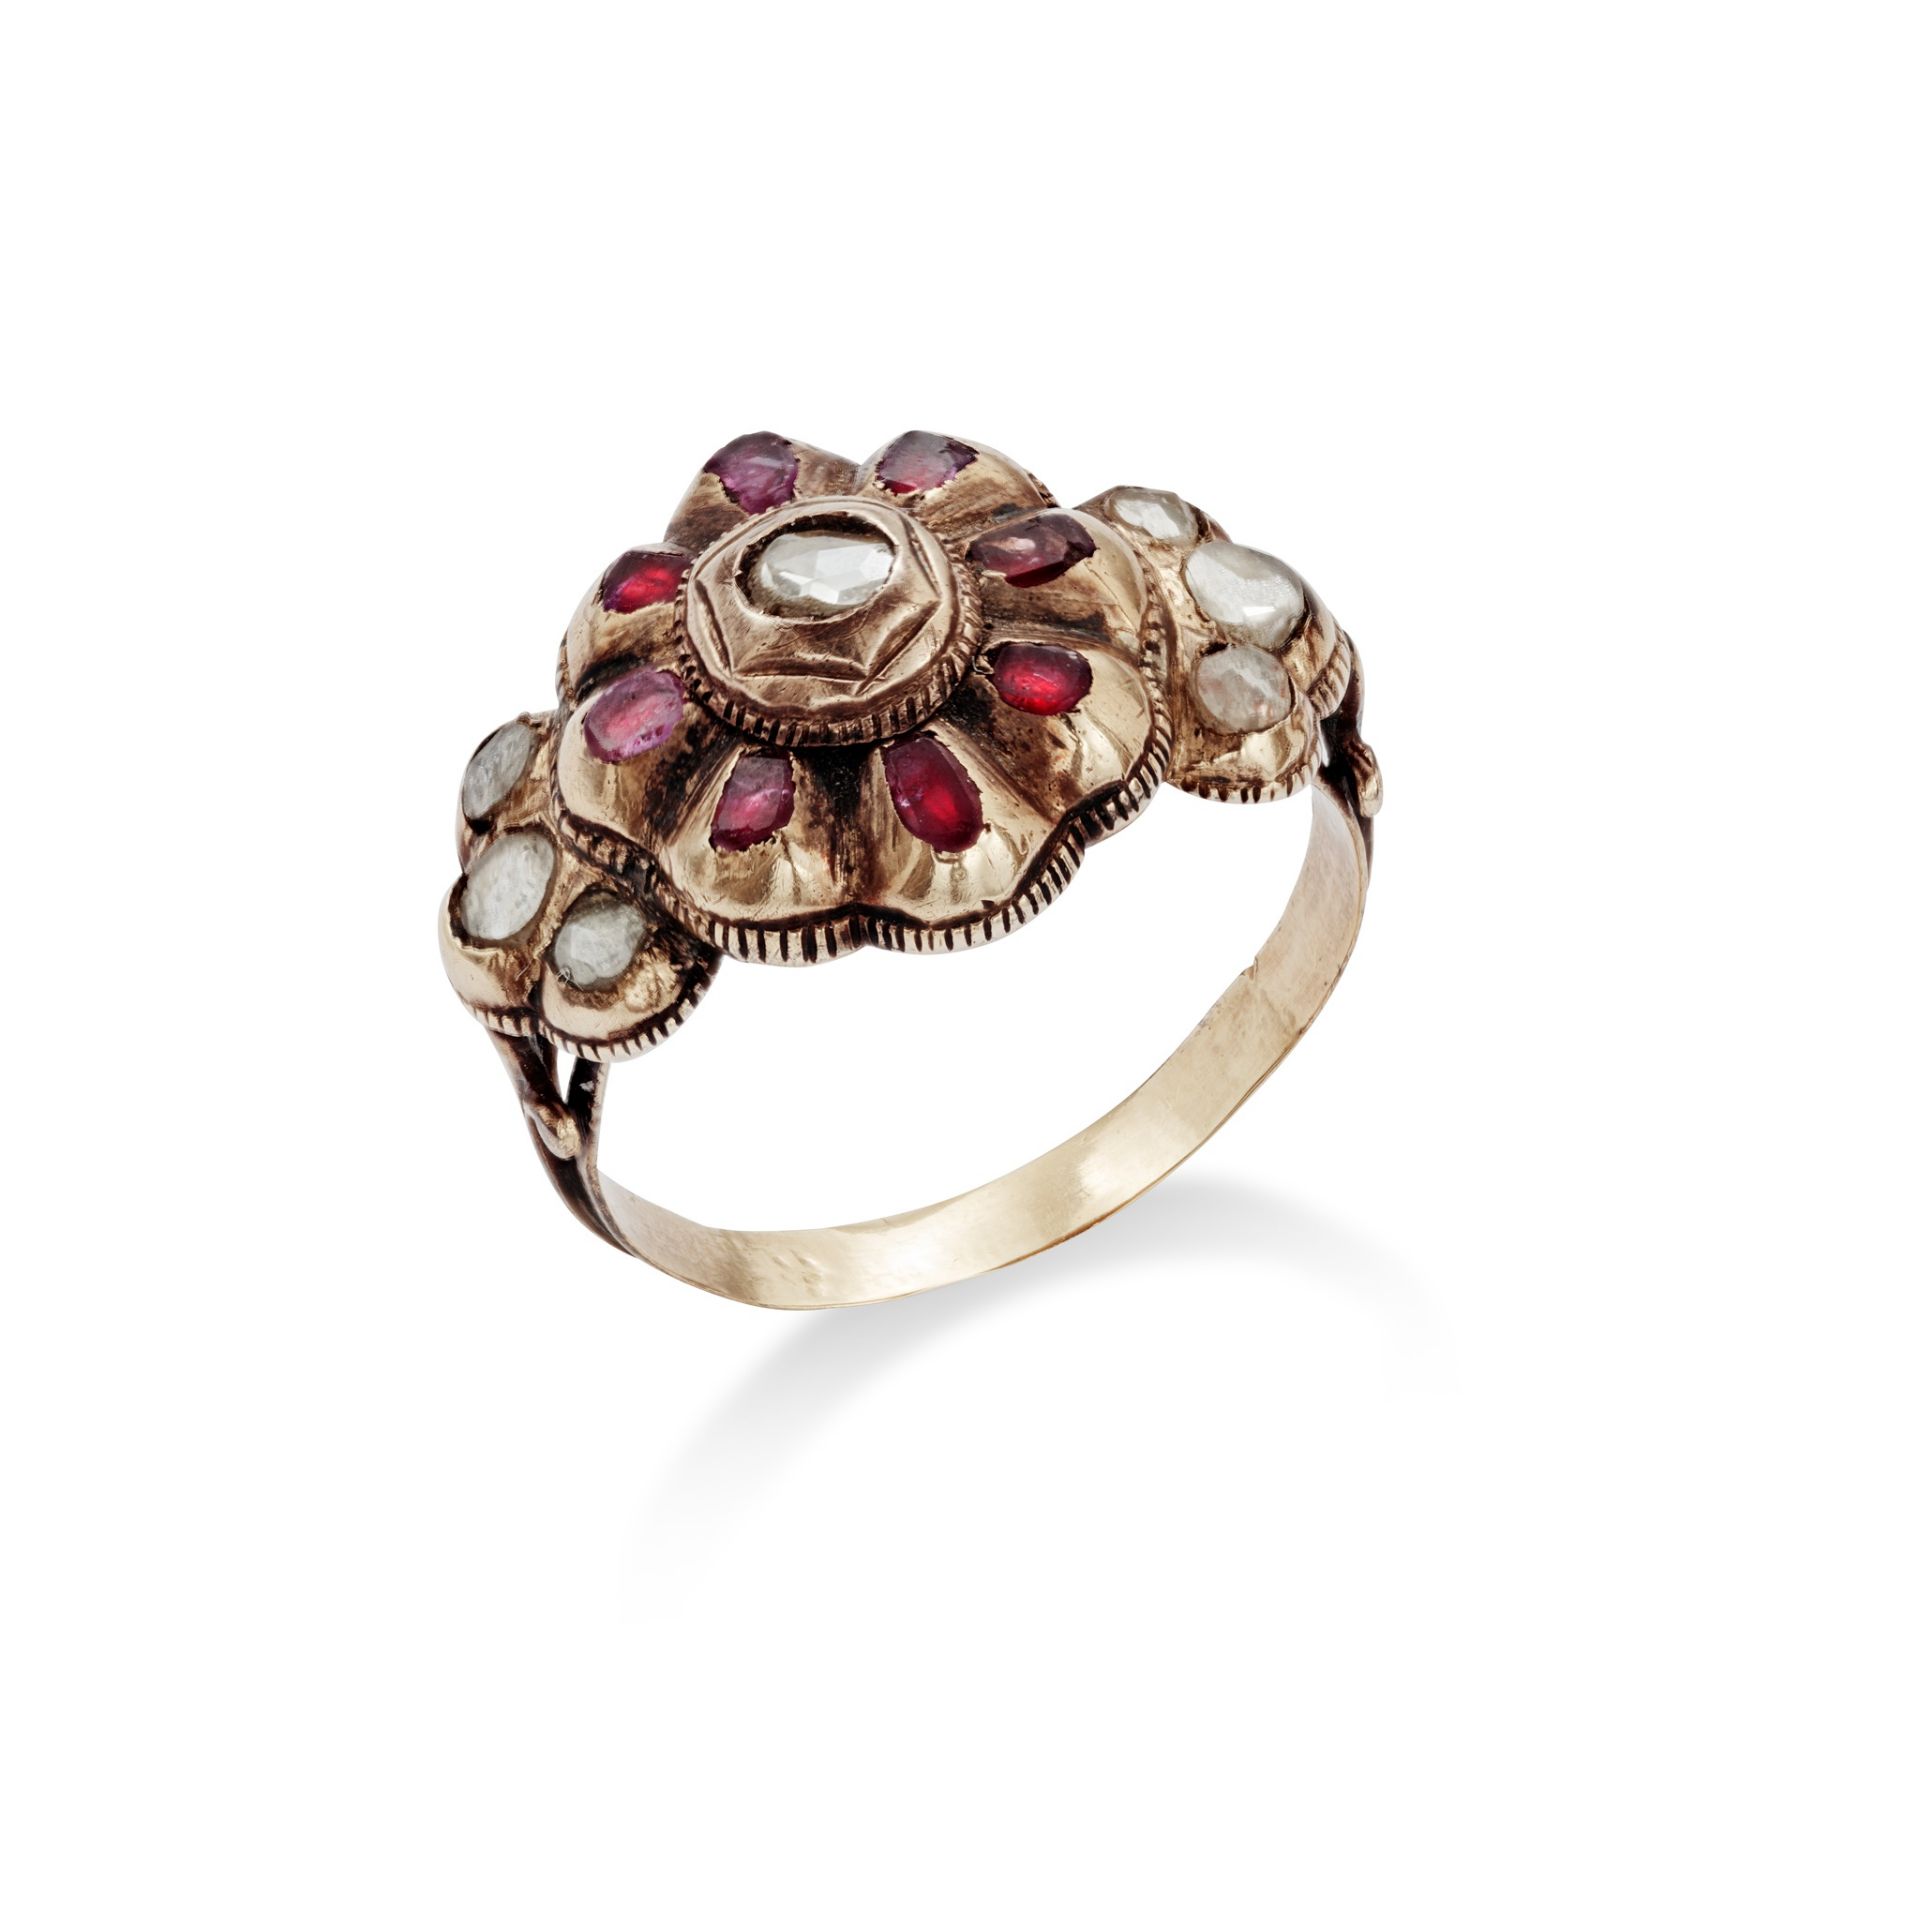 An 18th century diamond and gem-set ring Designed as a flowerhead cluster set with a rose-cut